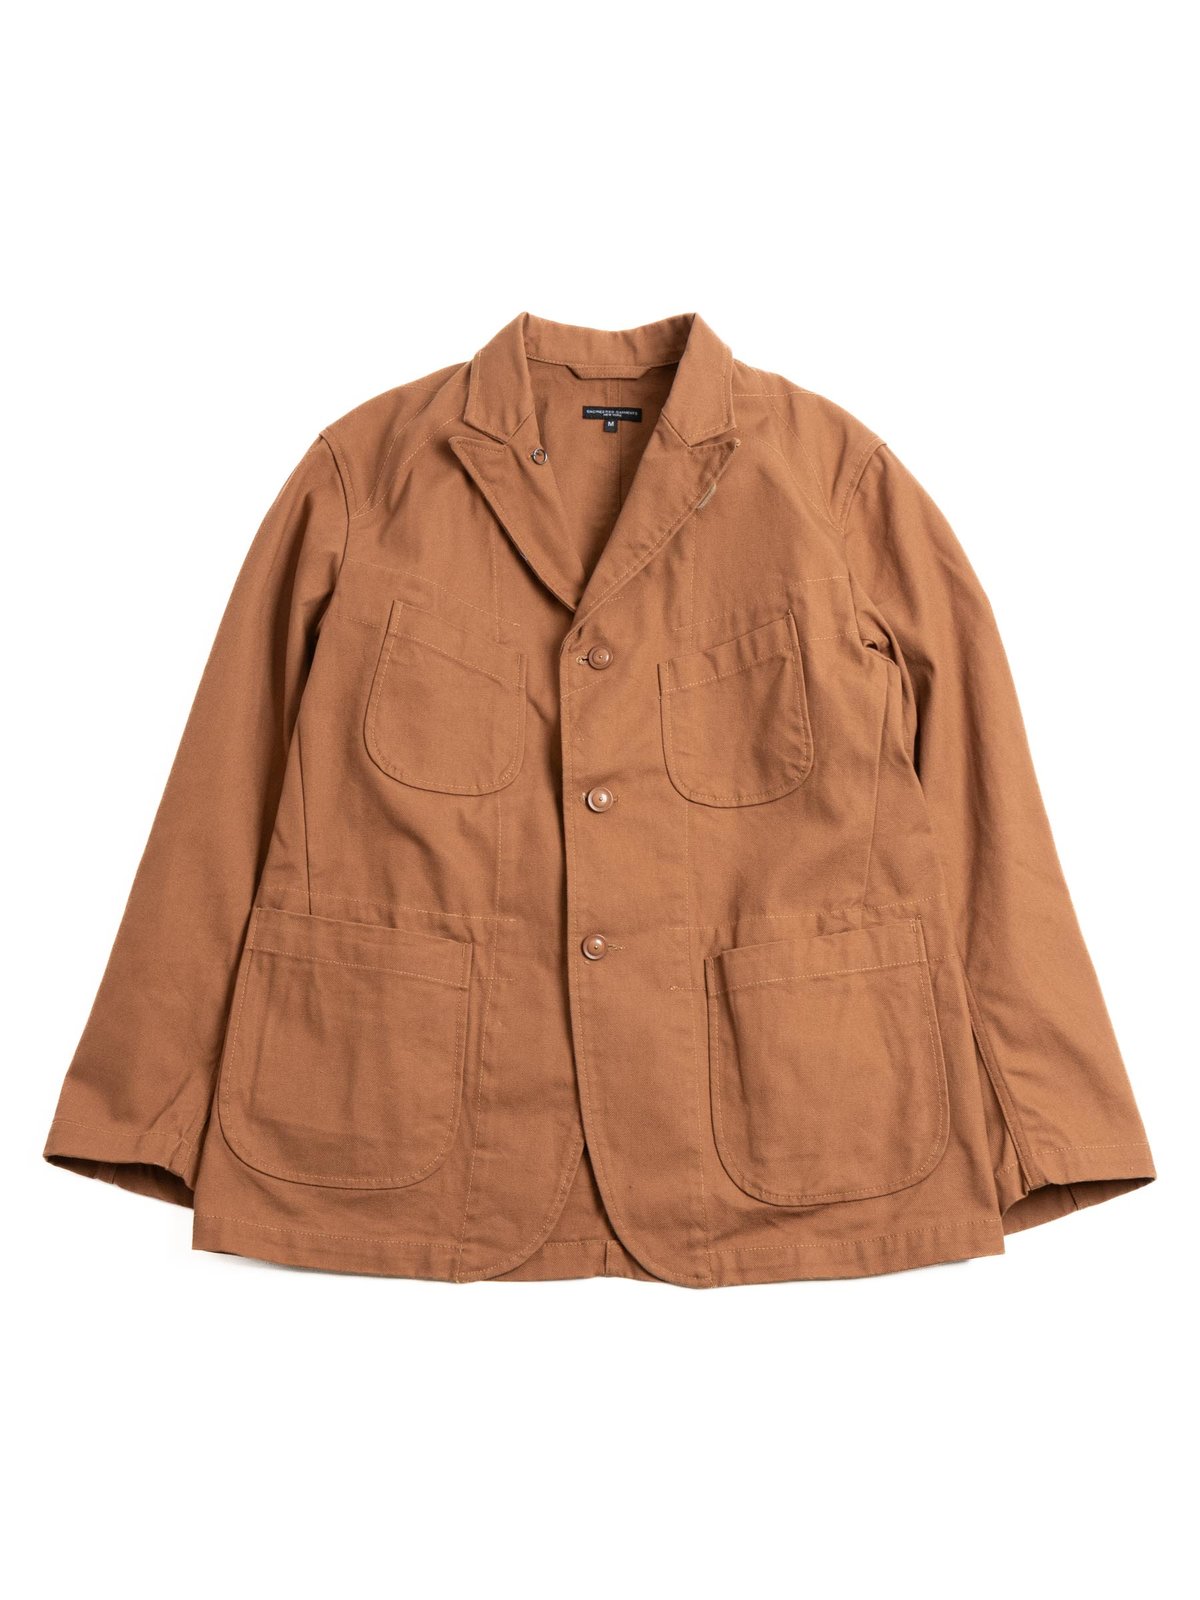 BEDFORD JACKET BROWN 12oz DUCK CANVAS by Engineered Garments – The